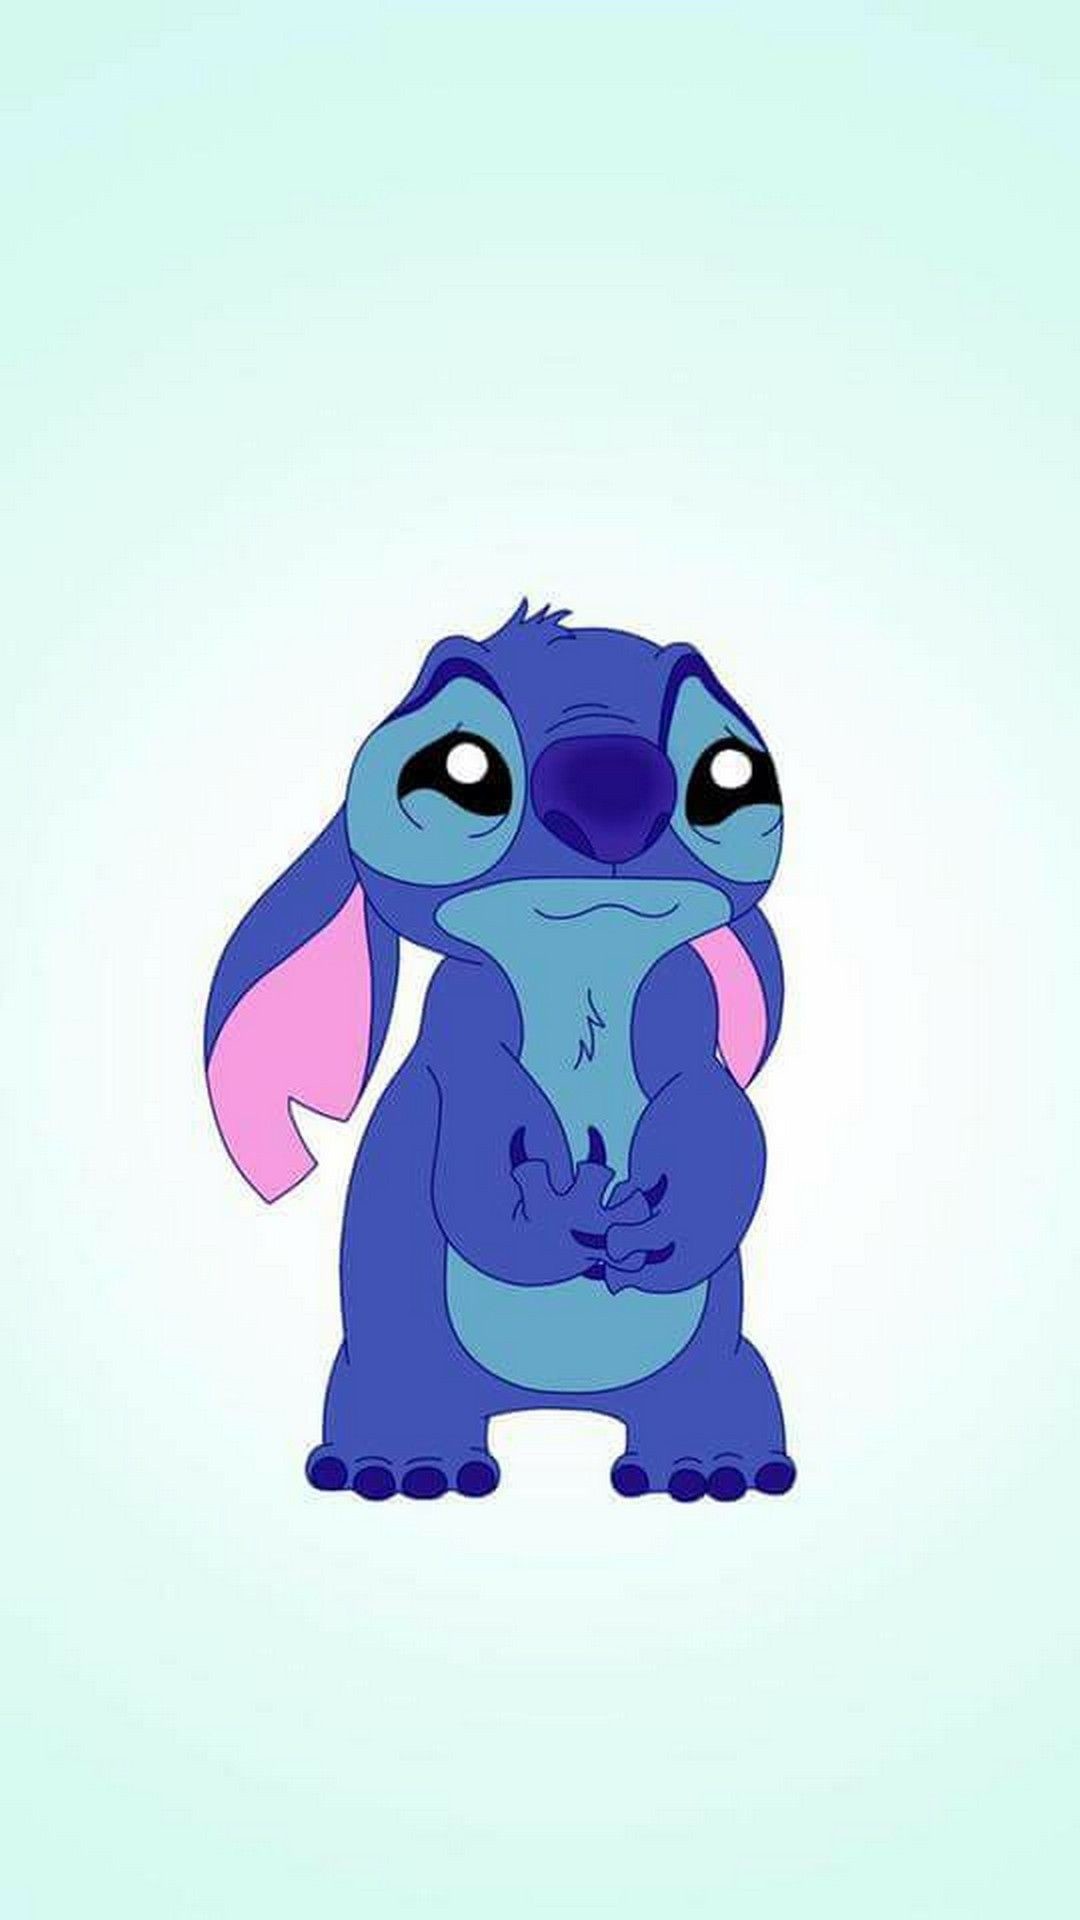 1080x1920 Stitch Wallpaper For Mobile Android | Best HD Wallpapers